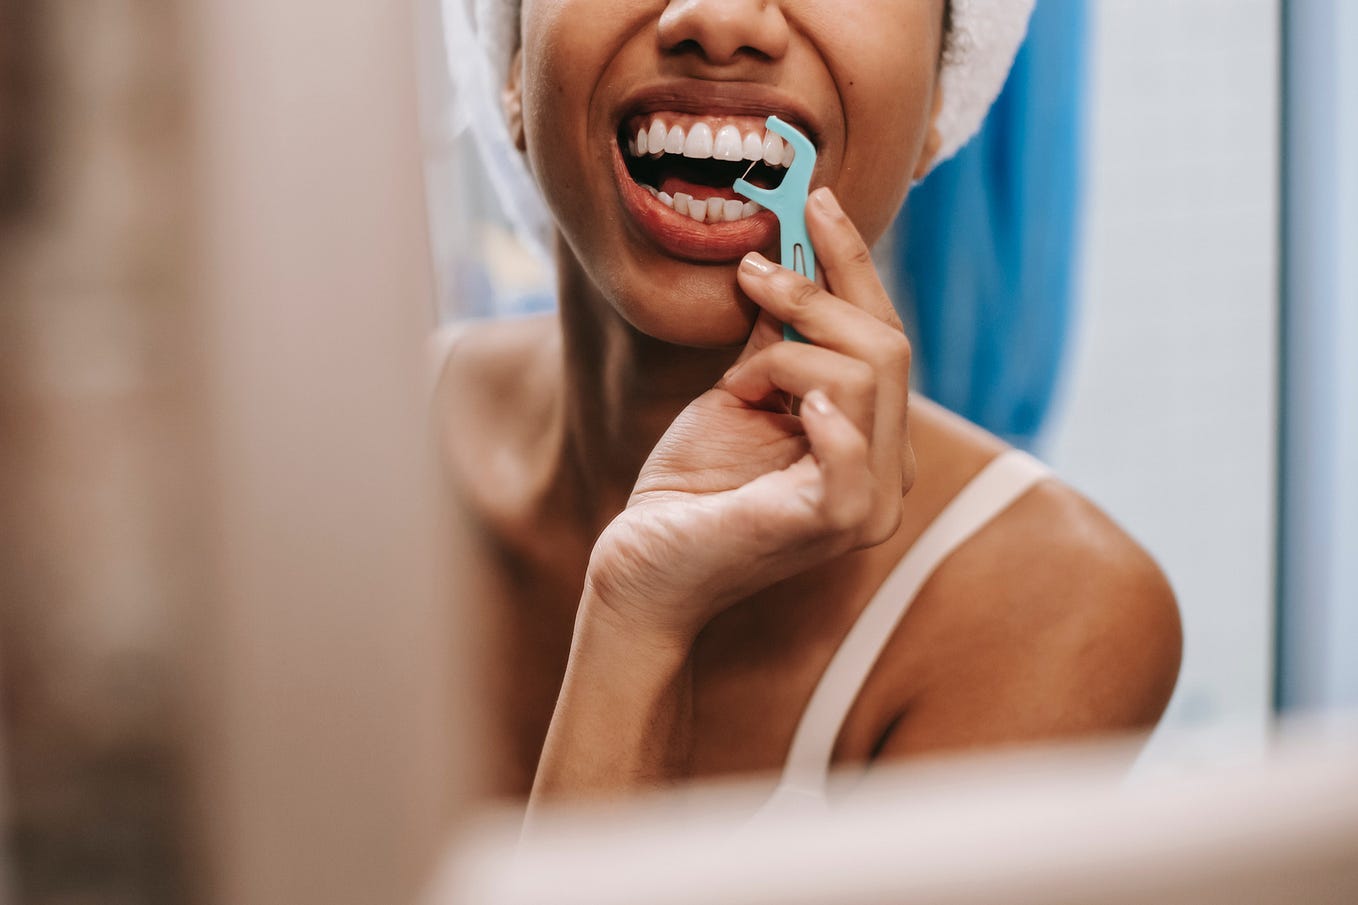 Woman in a bathroom mirror using a tooth flosser.